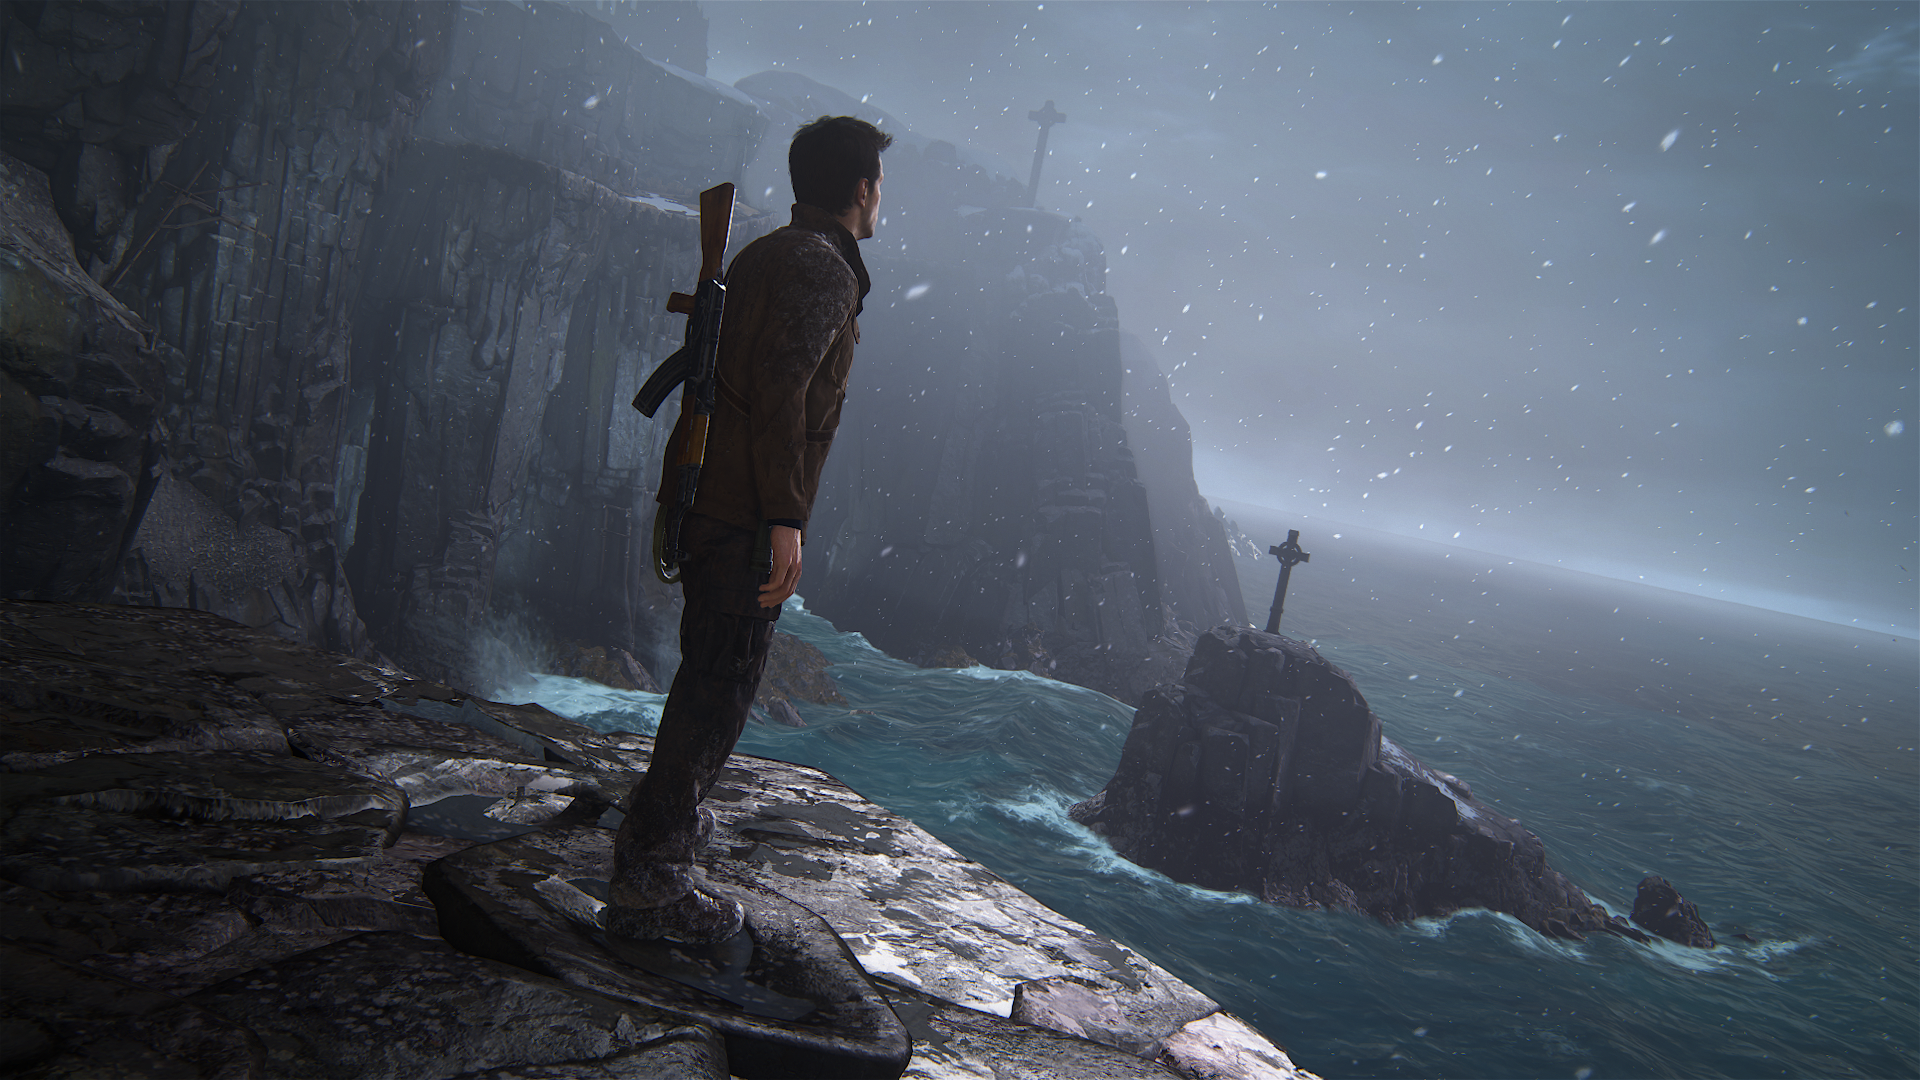 uncharted_4_1_by_gamephotography-daubrmd.png